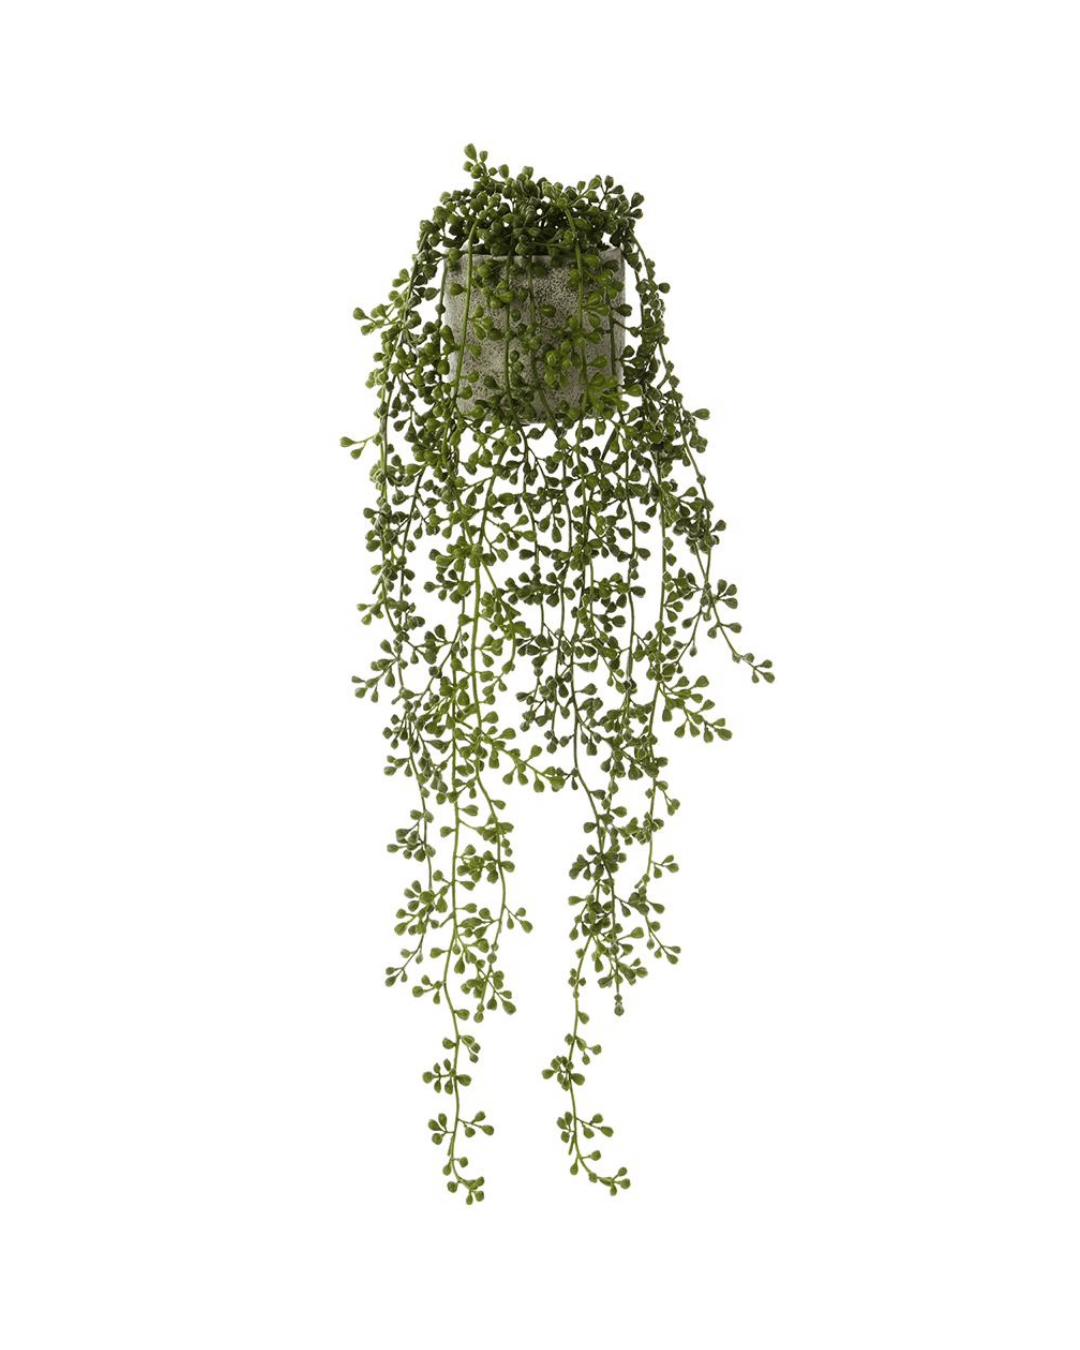 A 25" Hanging String of Pearl in Cement Pot, with lush, cascading green tendrils flowing downward from a square, top-mounted pot, isolated on a white background in Scottsdale, Arizona by AllState Floral And Craft.